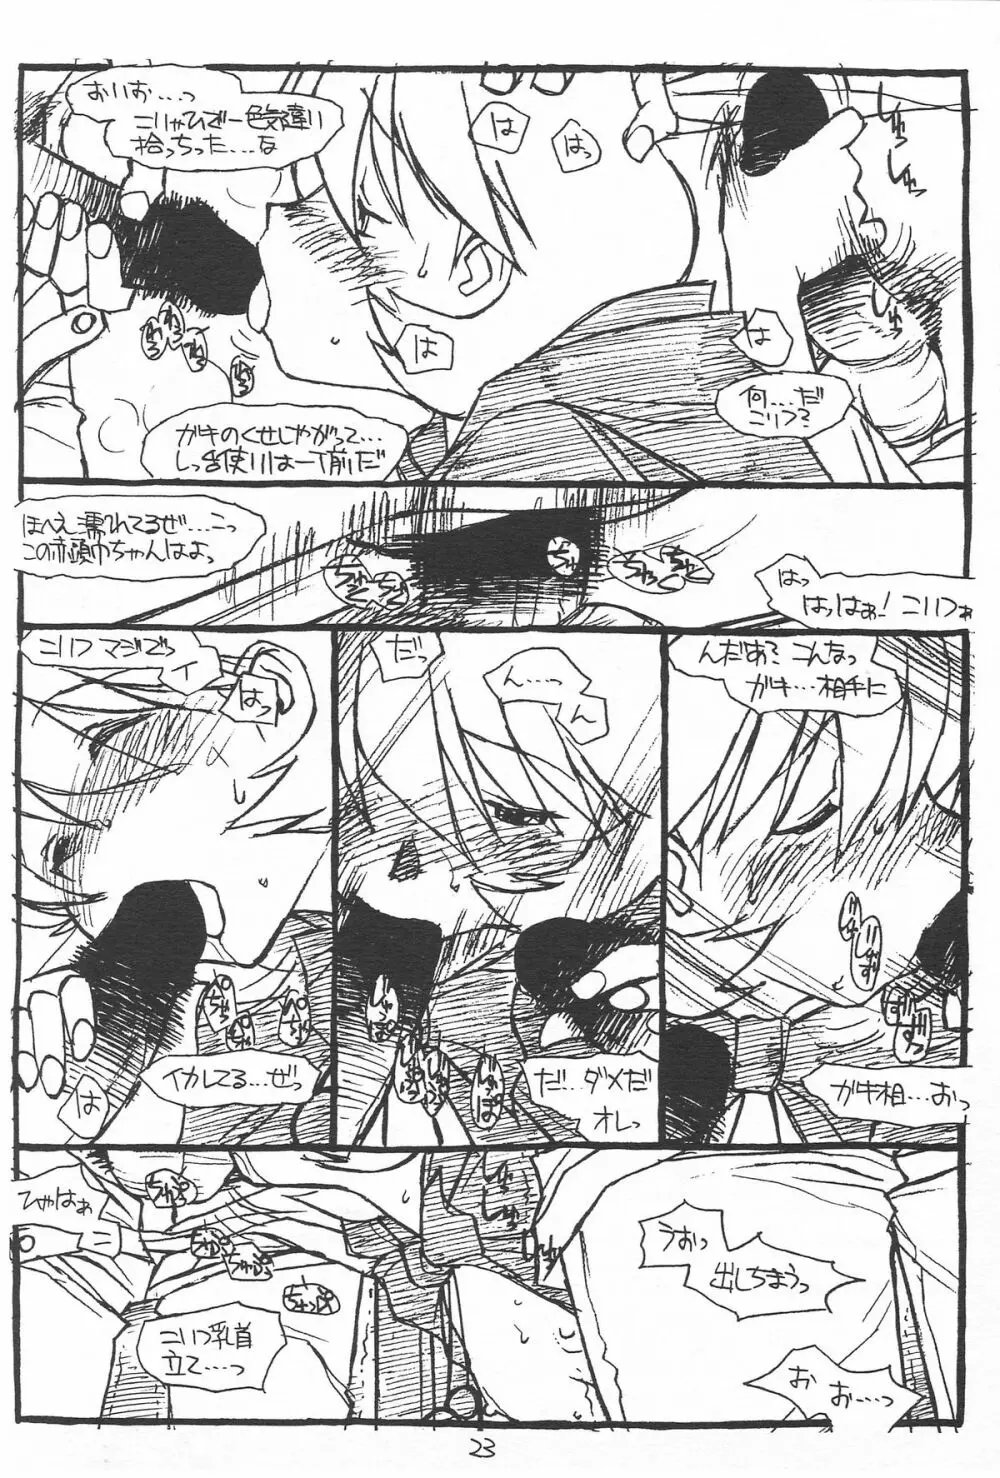 Show Time Buletta - page22